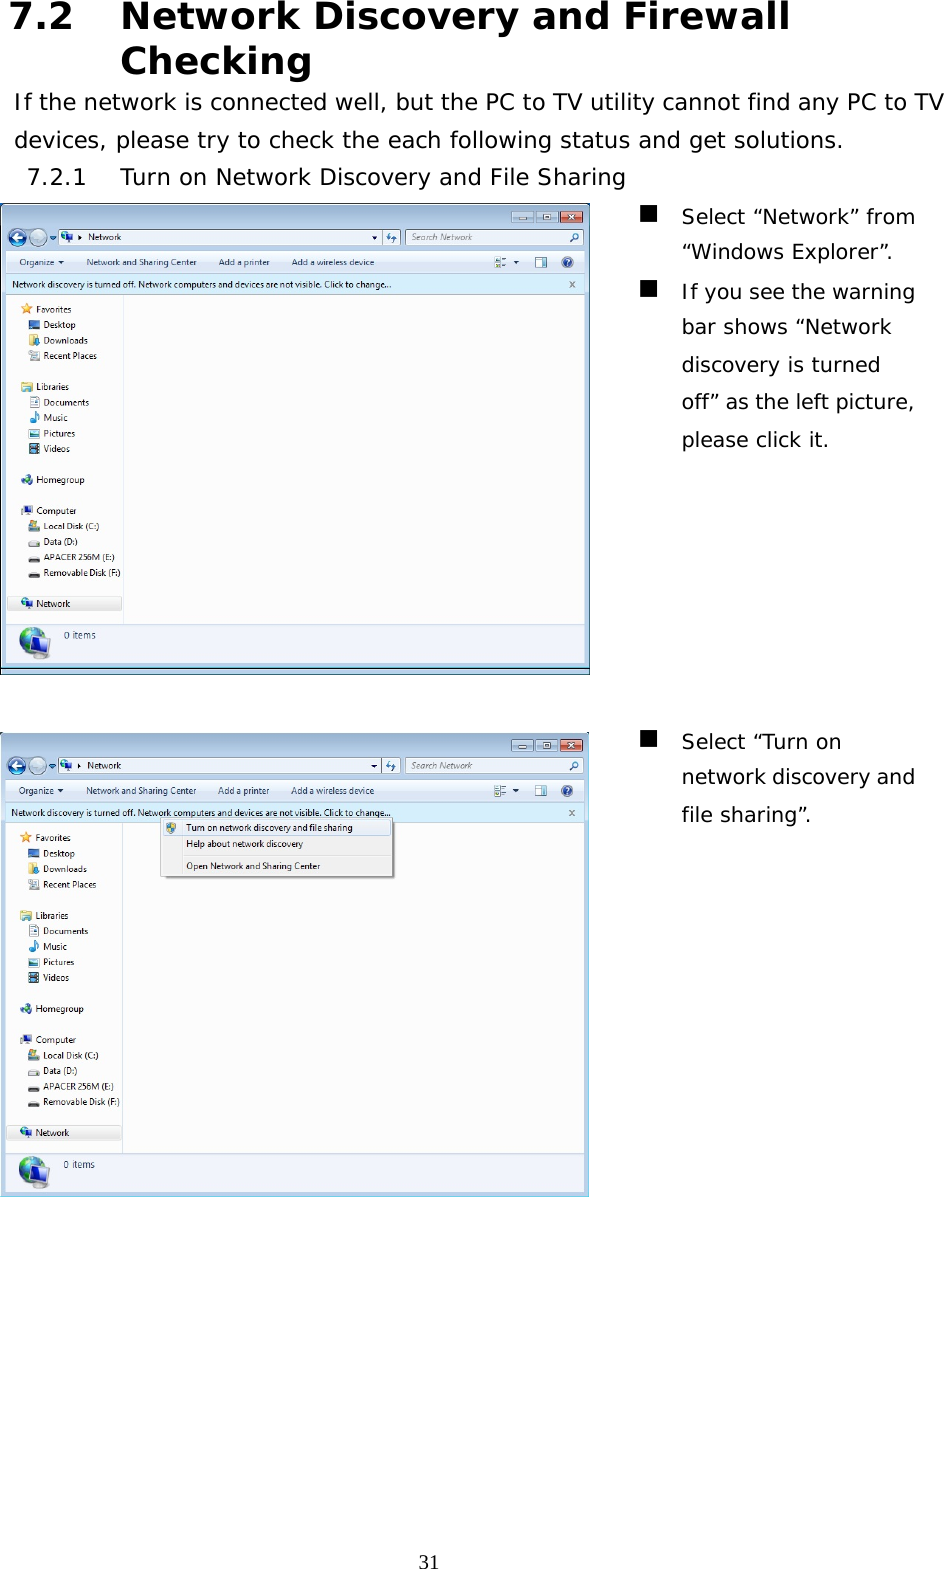   317.2 Network Discovery and Firewall Checking If the network is connected well, but the PC to TV utility cannot find any PC to TV devices, please try to check the each following status and get solutions. 7.2.1 Turn on Network Discovery and File Sharing    Select “Network” from “Windows Explorer”.  If you see the warning bar shows “Network discovery is turned off” as the left picture, please click it.    Select “Turn on network discovery and file sharing”. 